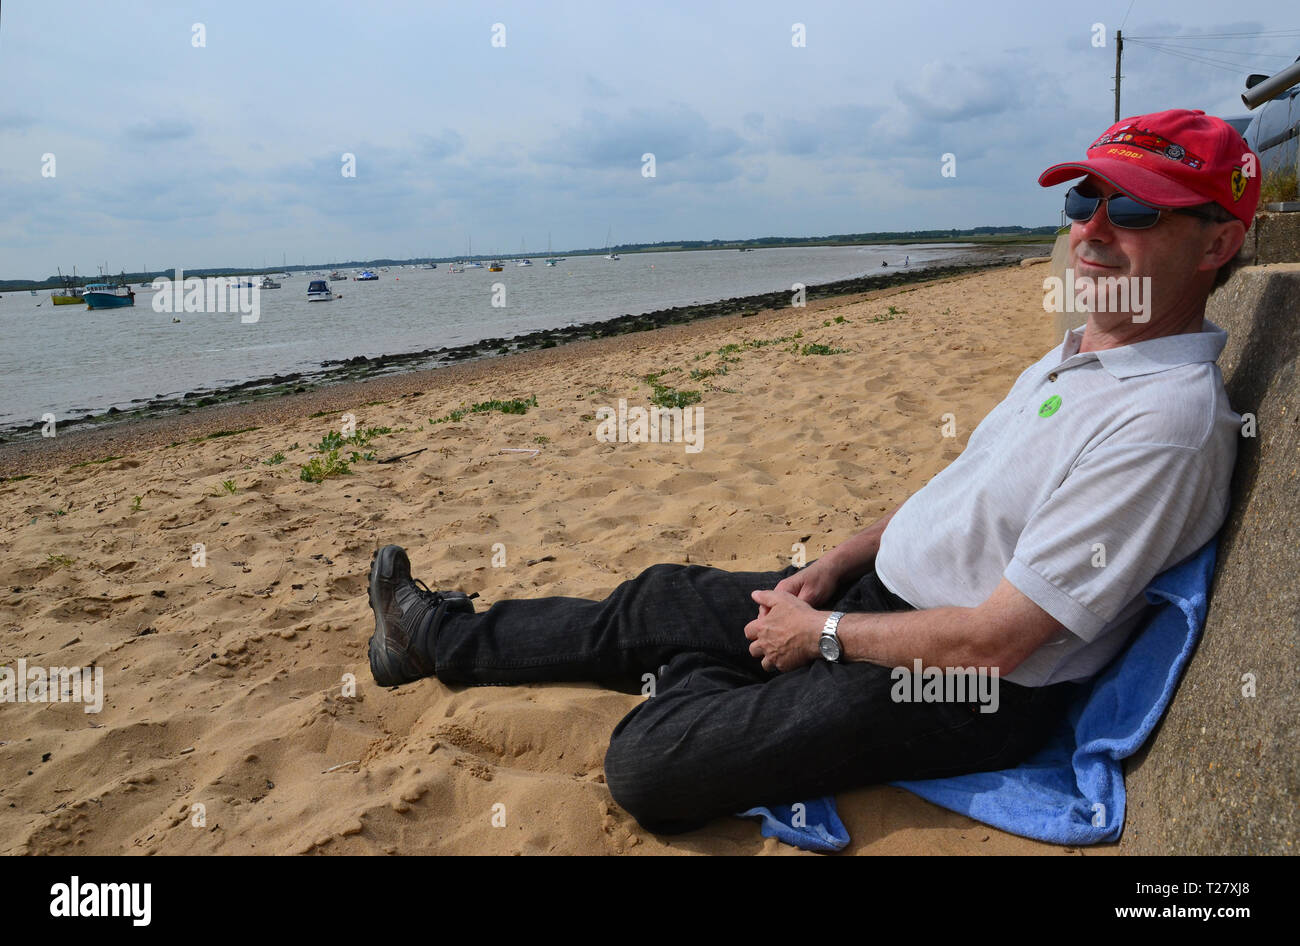 Man relaxing on the beach at Bawdsey, Suffolk, England, UK Stock Photo